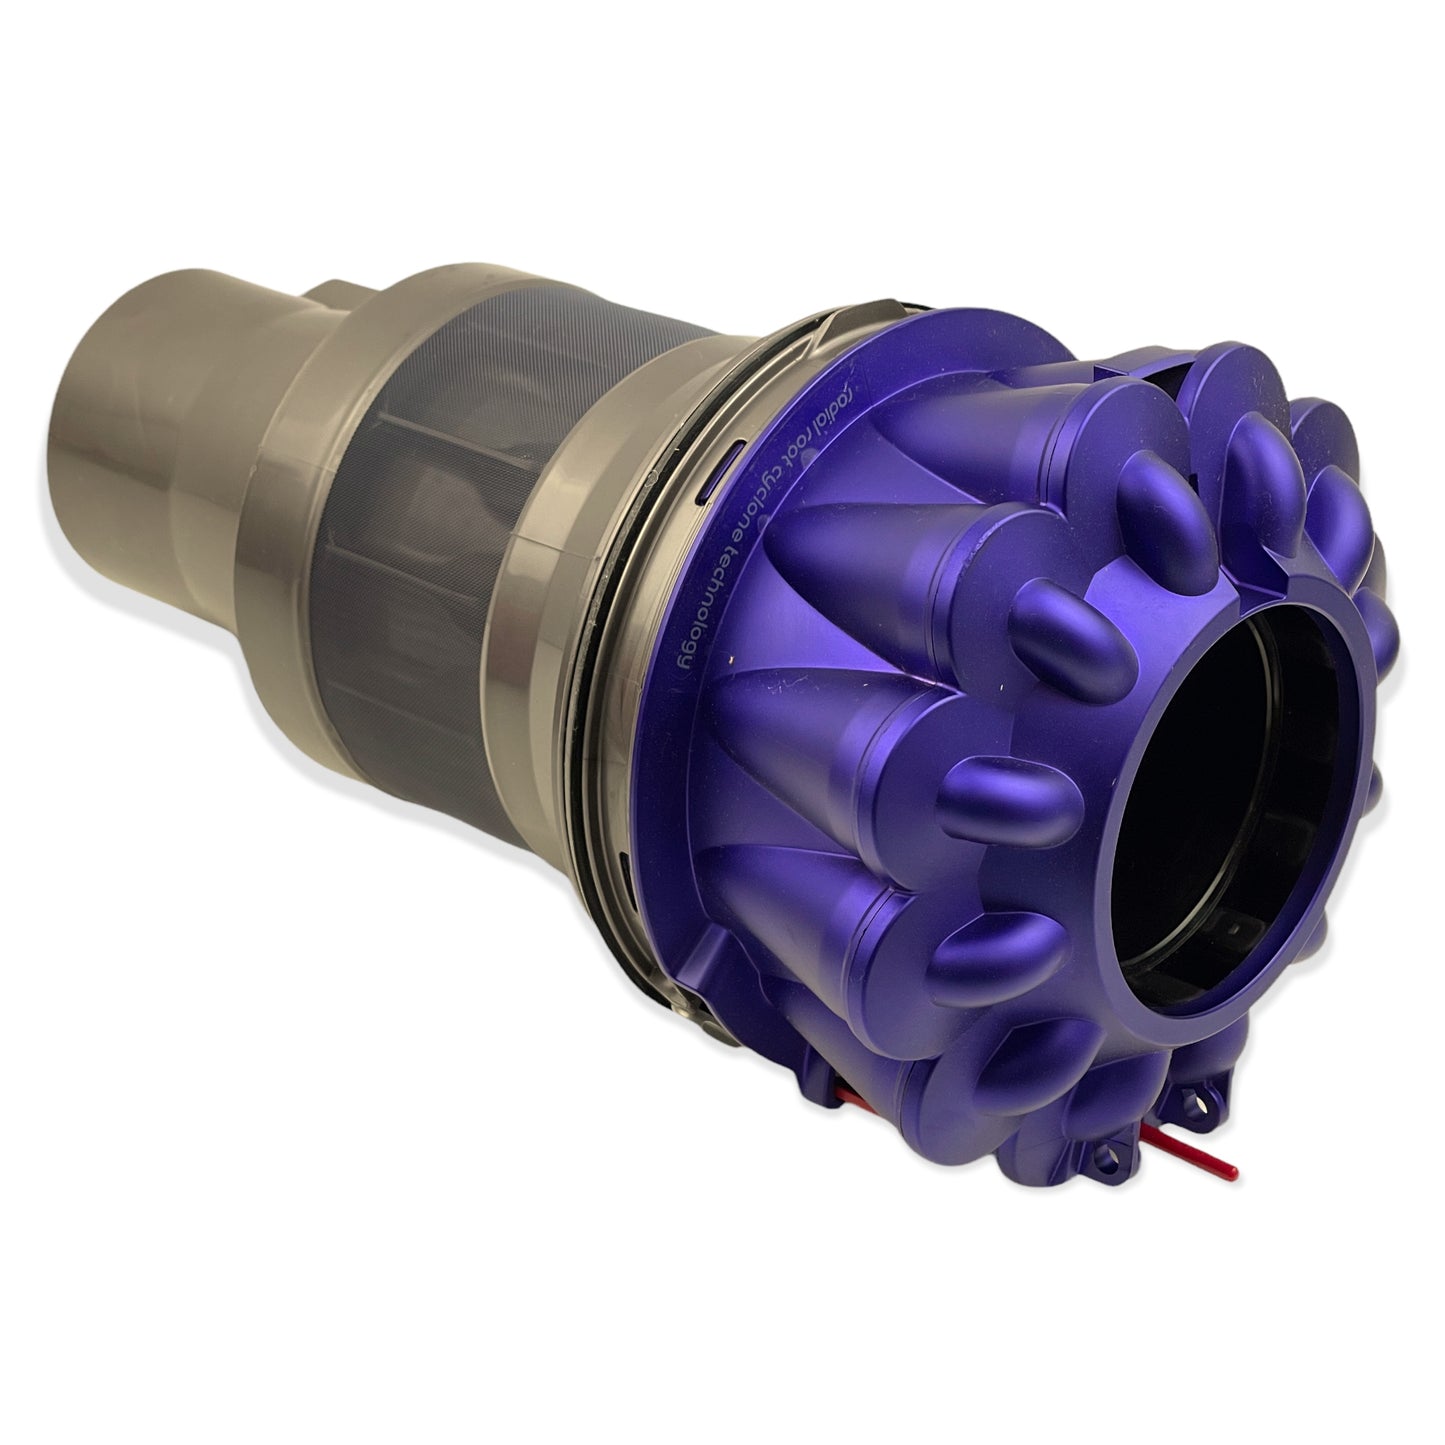 NEW GENUINE Dyson UP13, DC41, DC65, DC66 Ball Vacuum Cyclone Assembly - Purple